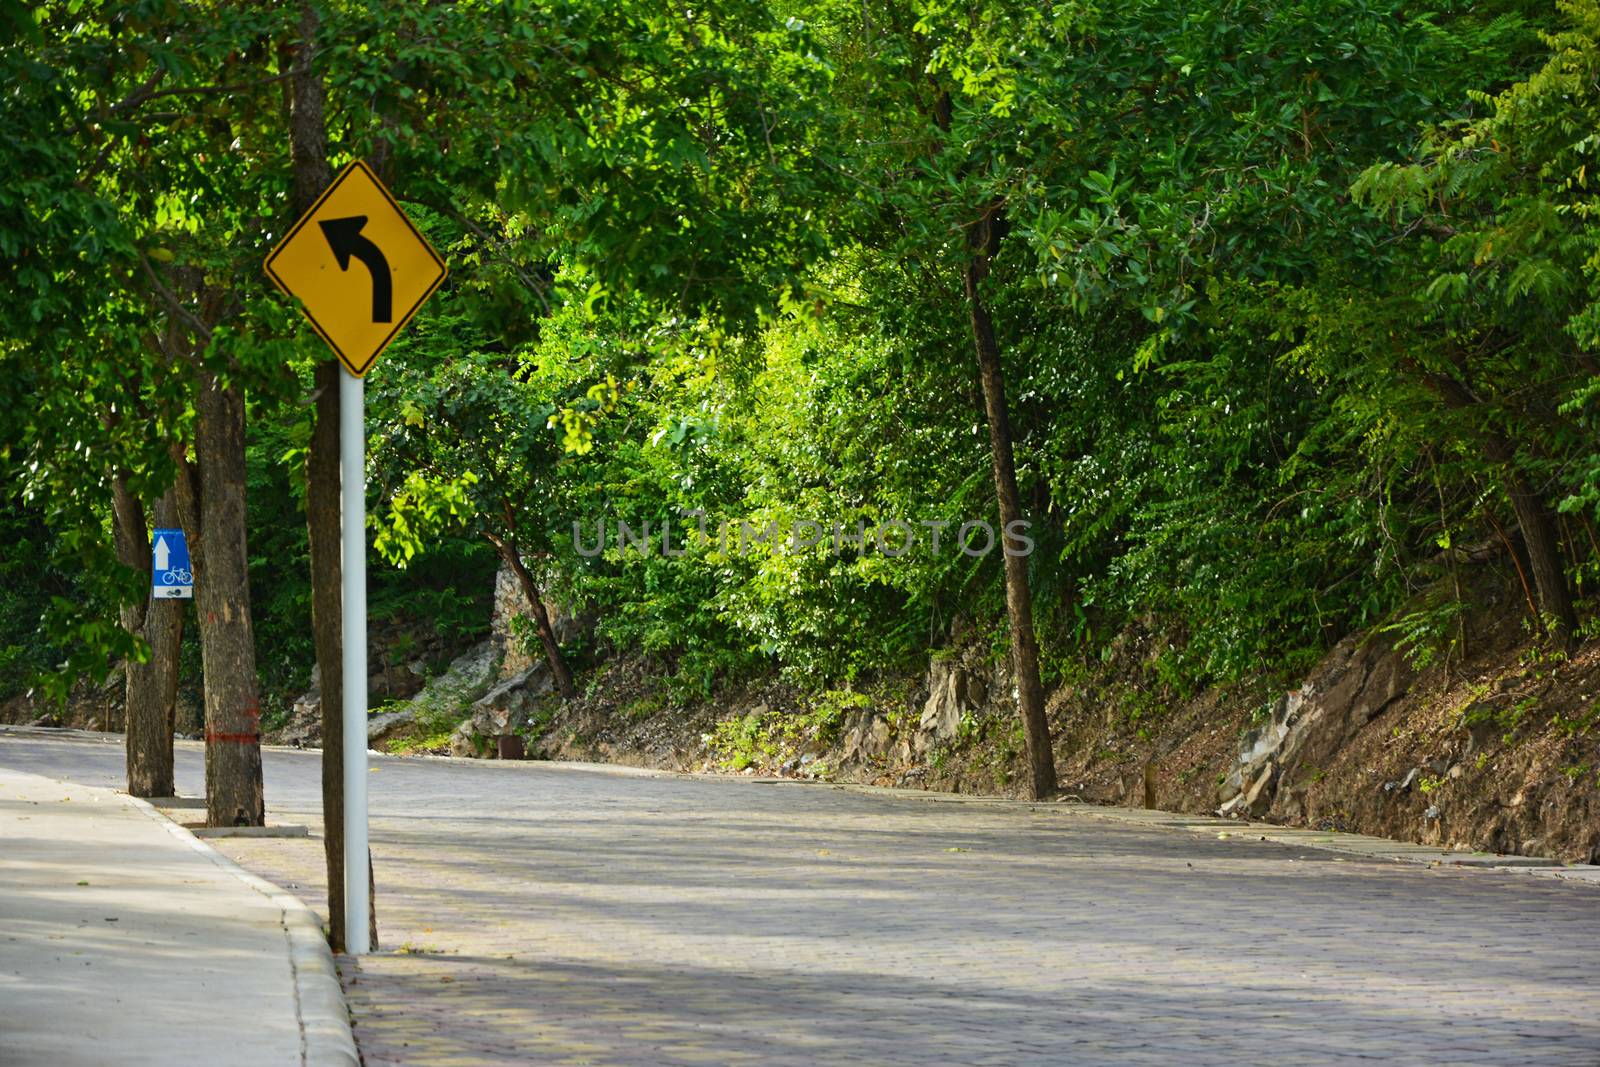 Road on Larn island in Pattaya city of Thailand by think4photop